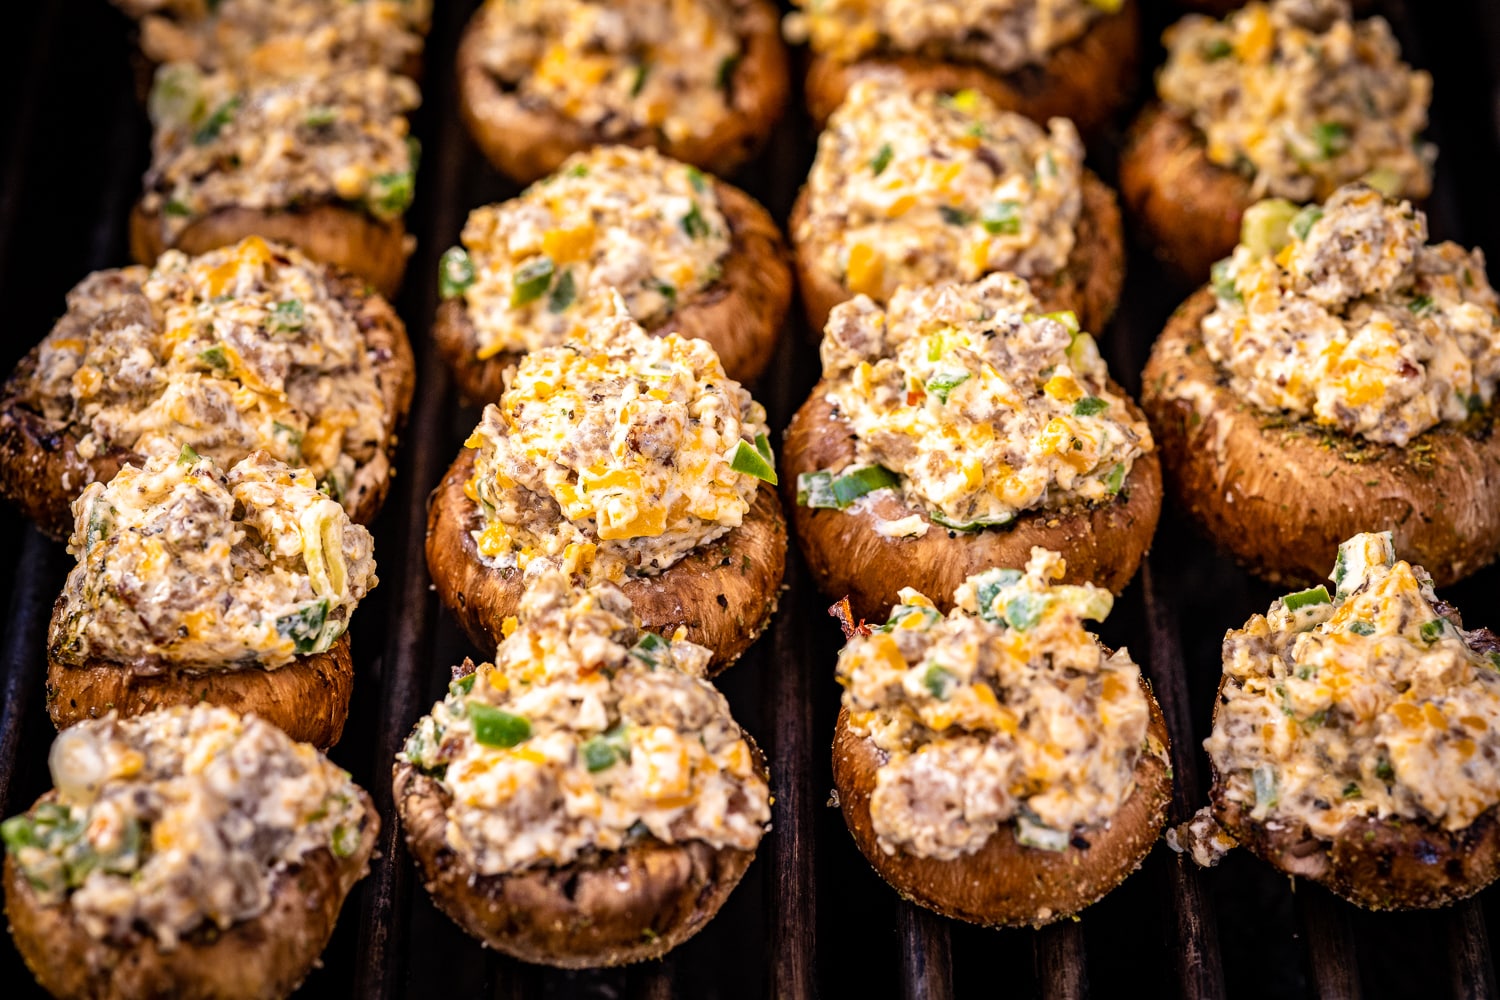 Stuffed mushrooms on the grill grates of a gas grill.